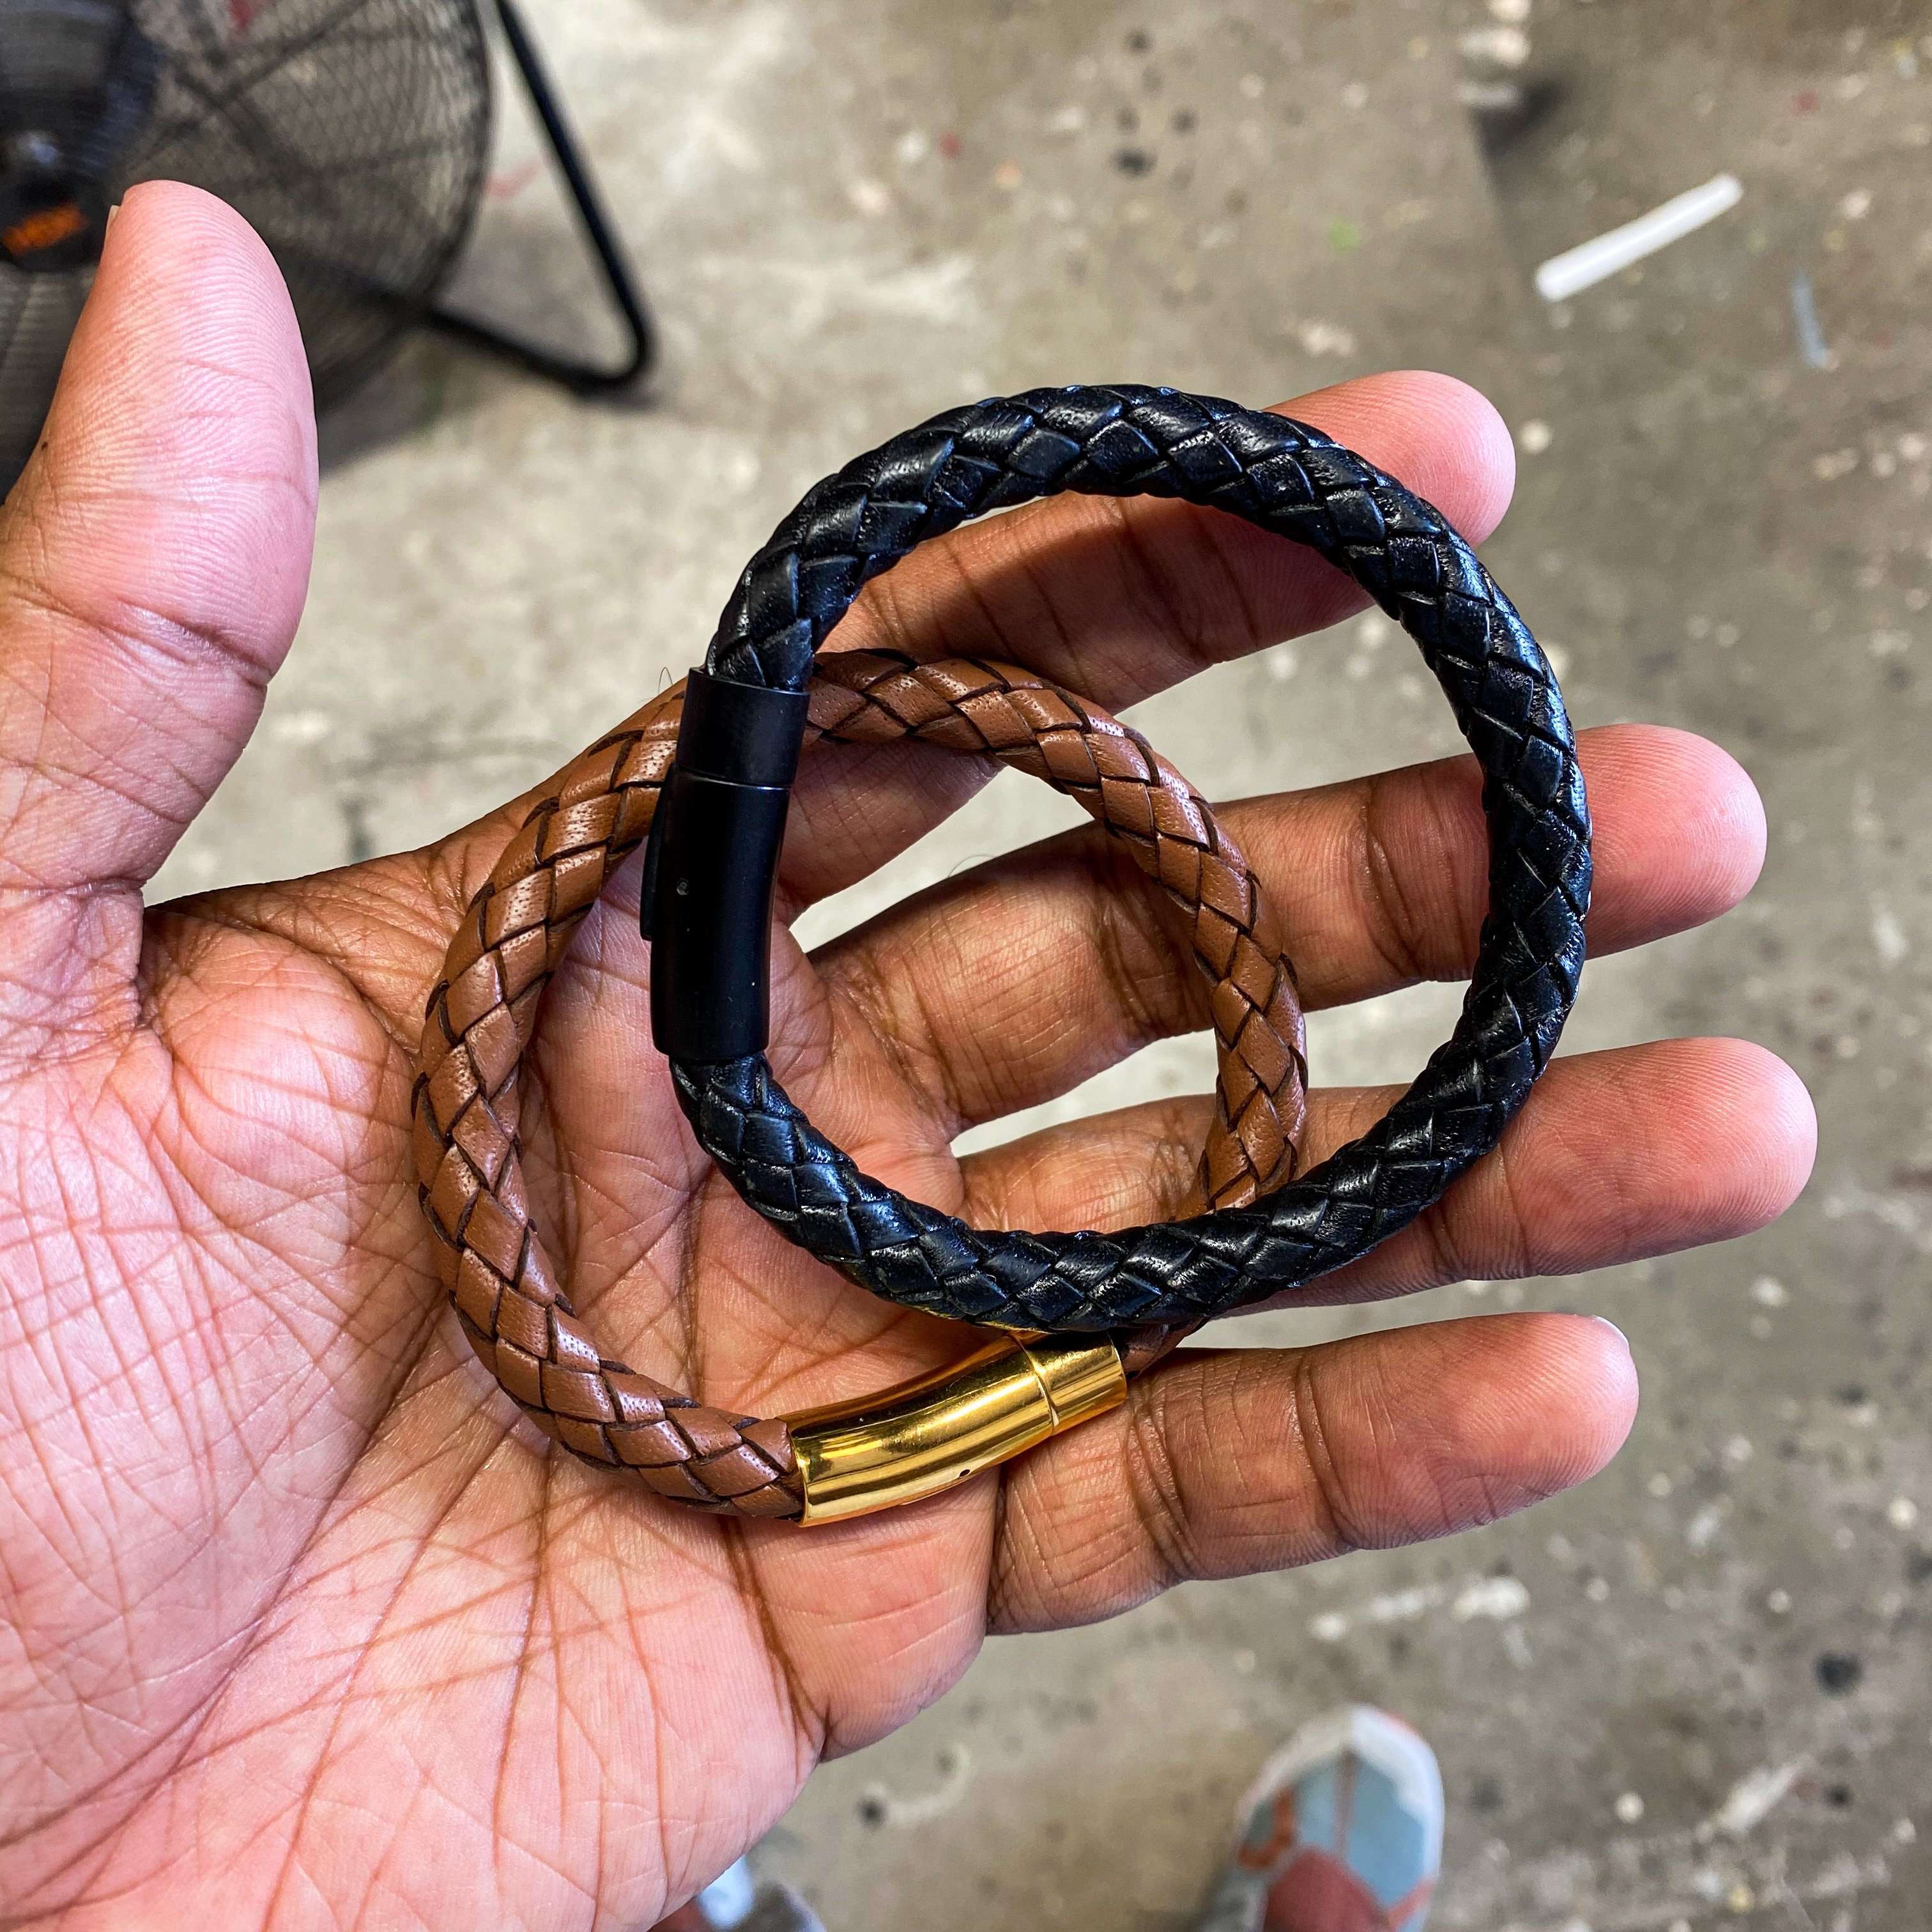 Gold and Brown Leather Loop Bracelet